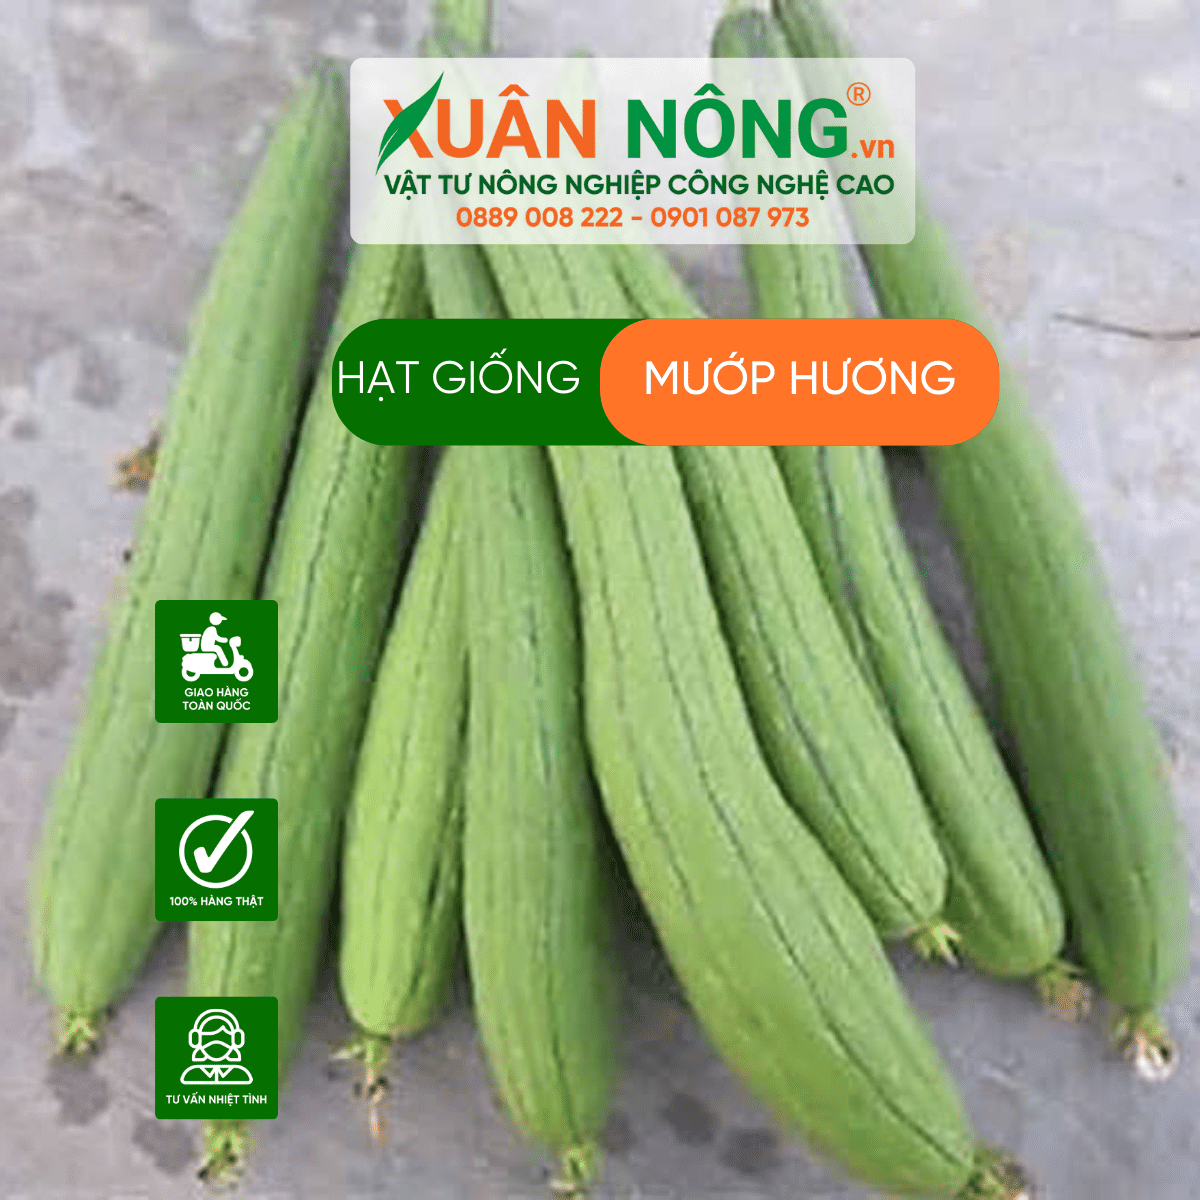 cach-trong-muop - huong 